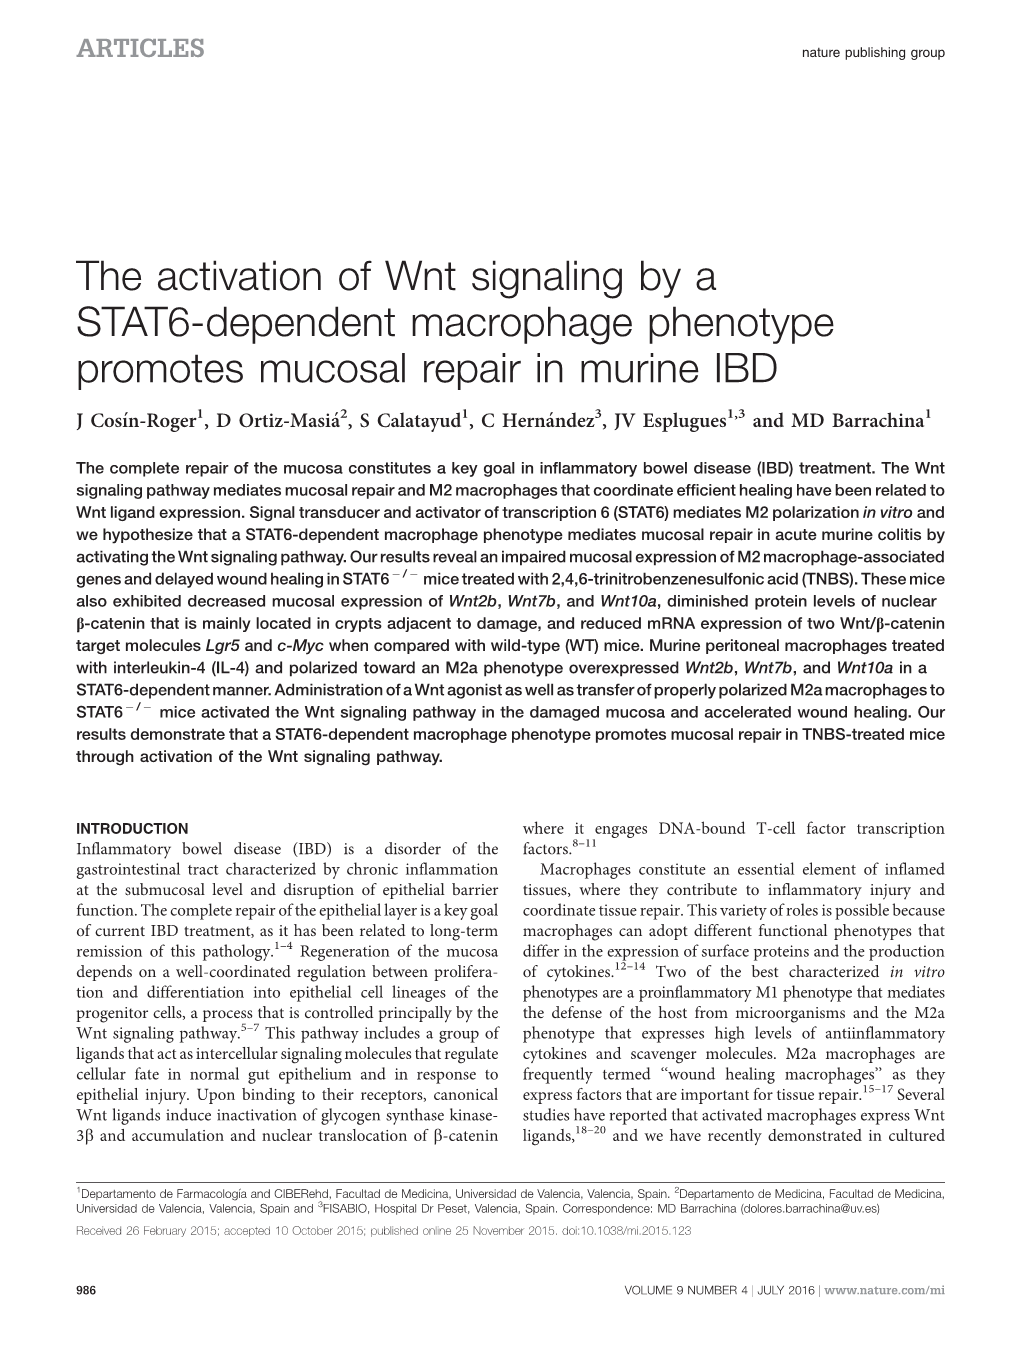 The Activation of Wnt Signaling by a STAT6-Dependent Macrophage Phenotype Promotes Mucosal Repair in Murine IBD